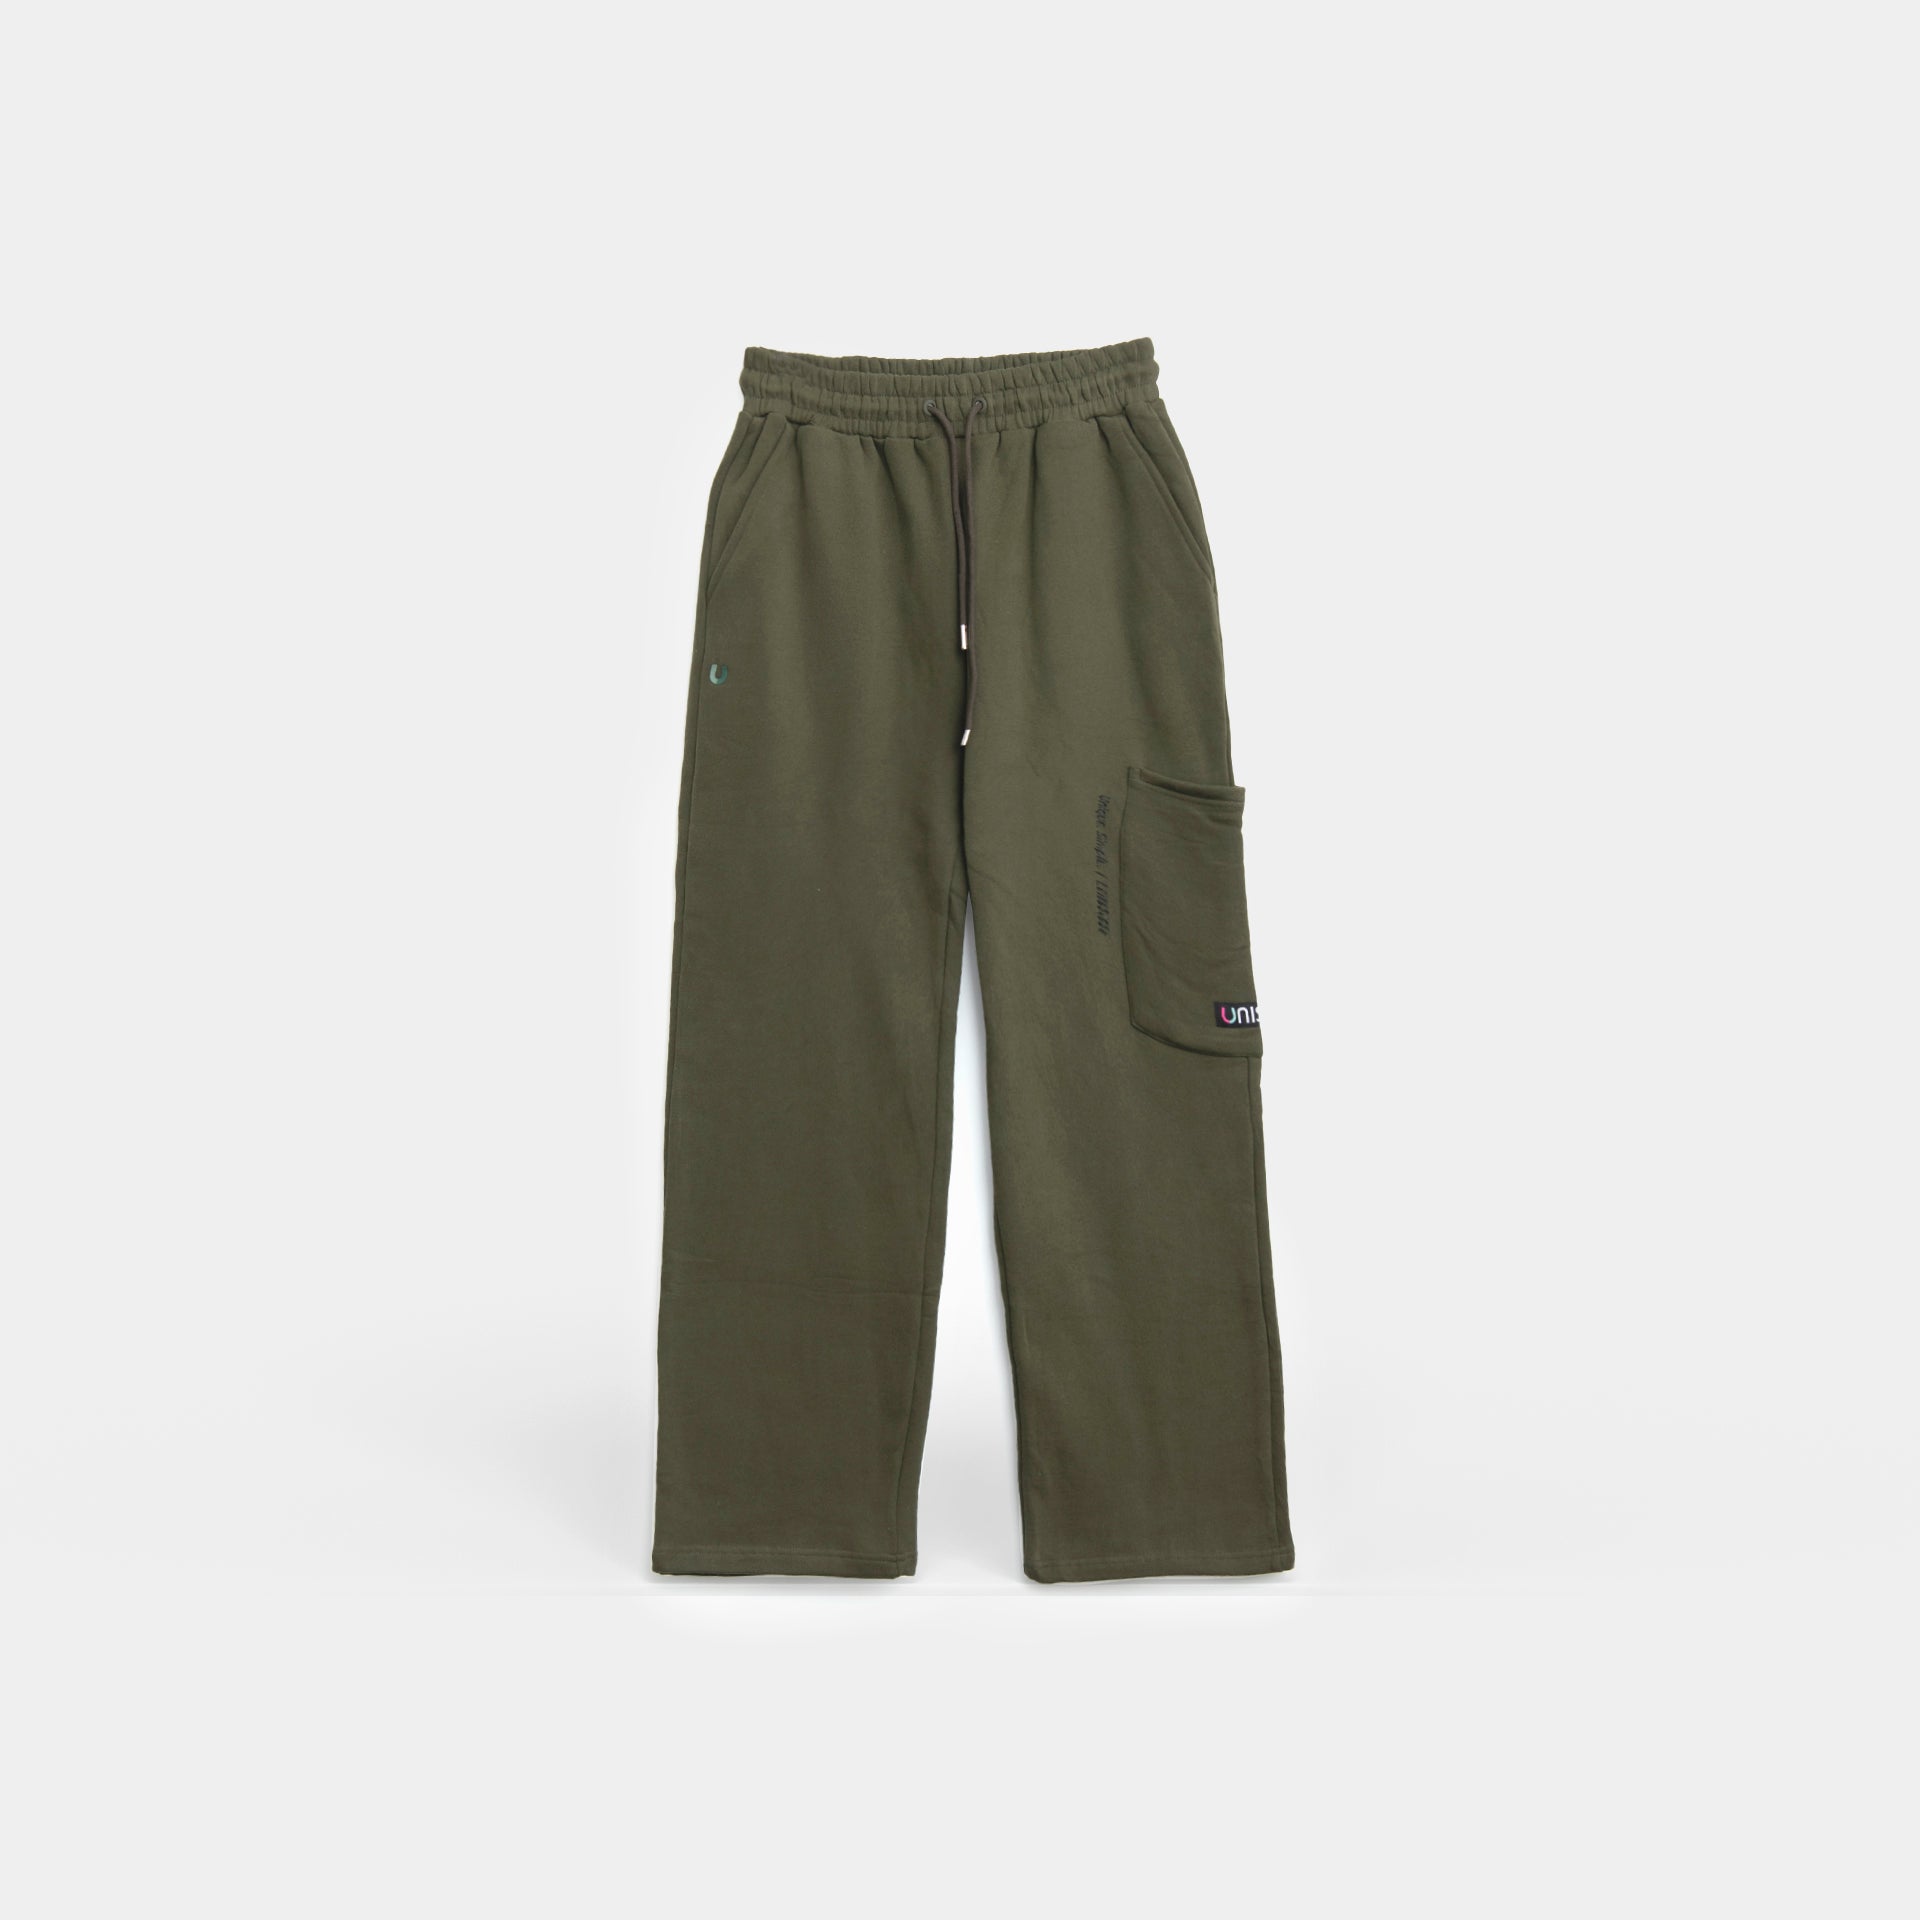 Olive Green Sweatpants From Unisi